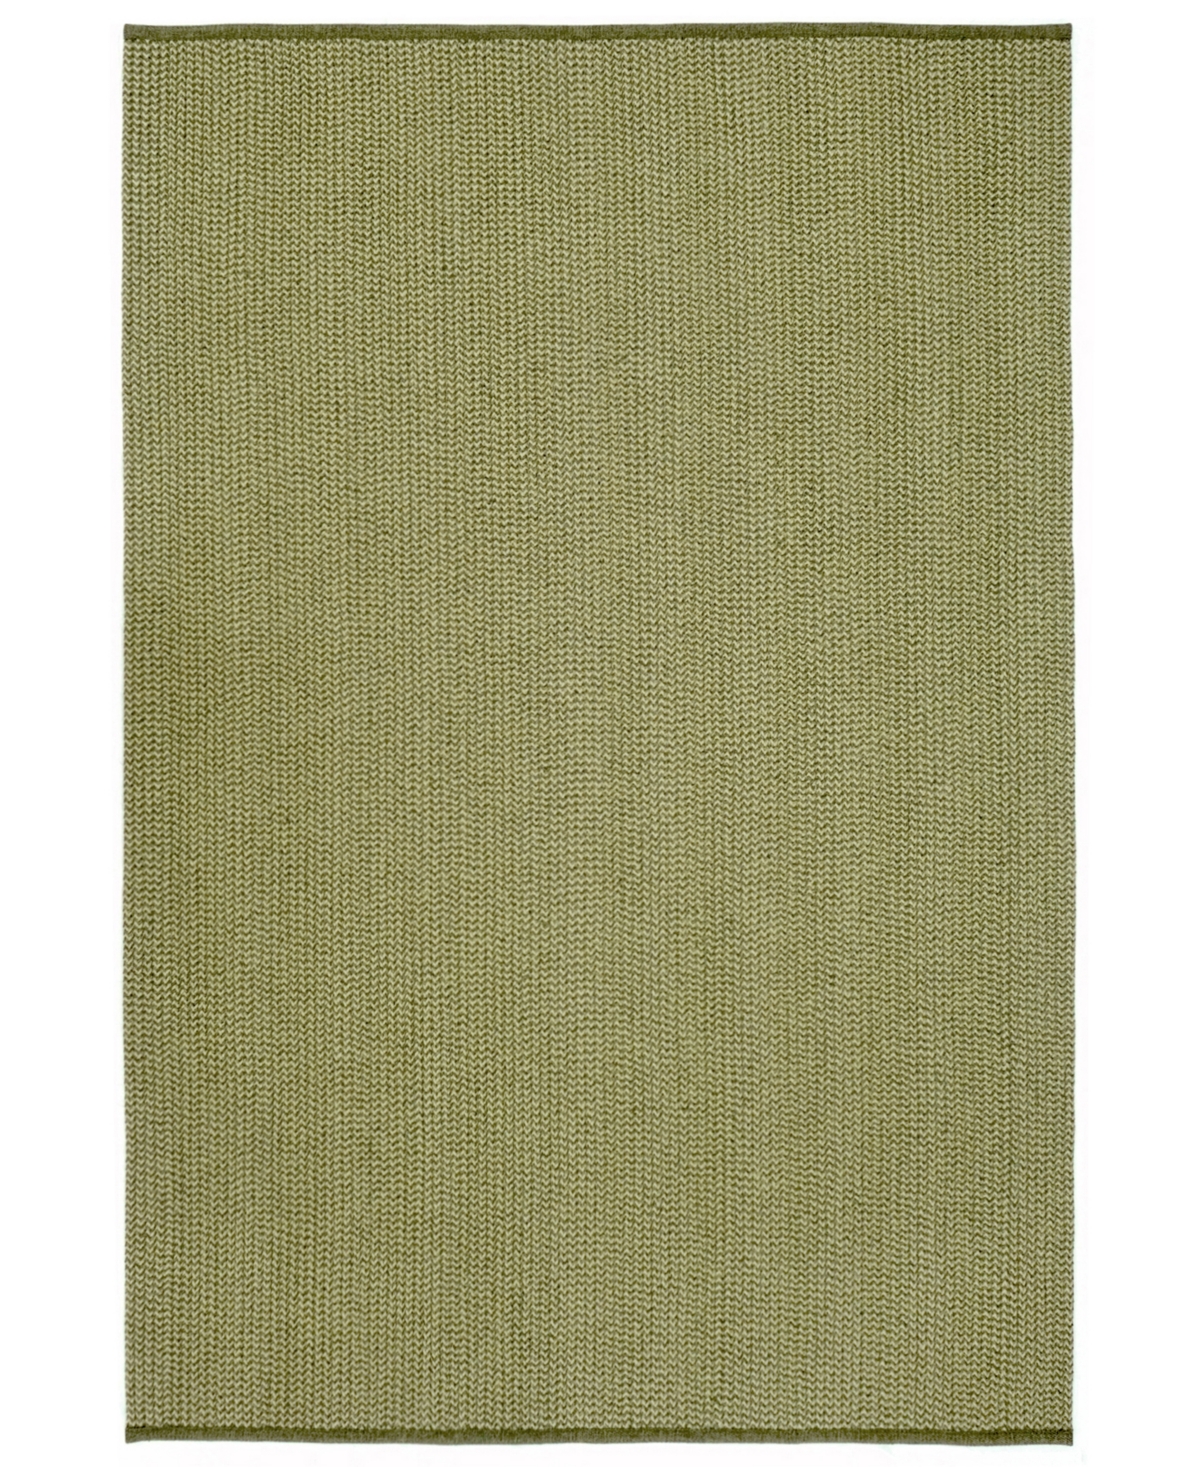 Liora Manne Calais Solid 8'3" X 11'6" Outdoor Area Rug In Green